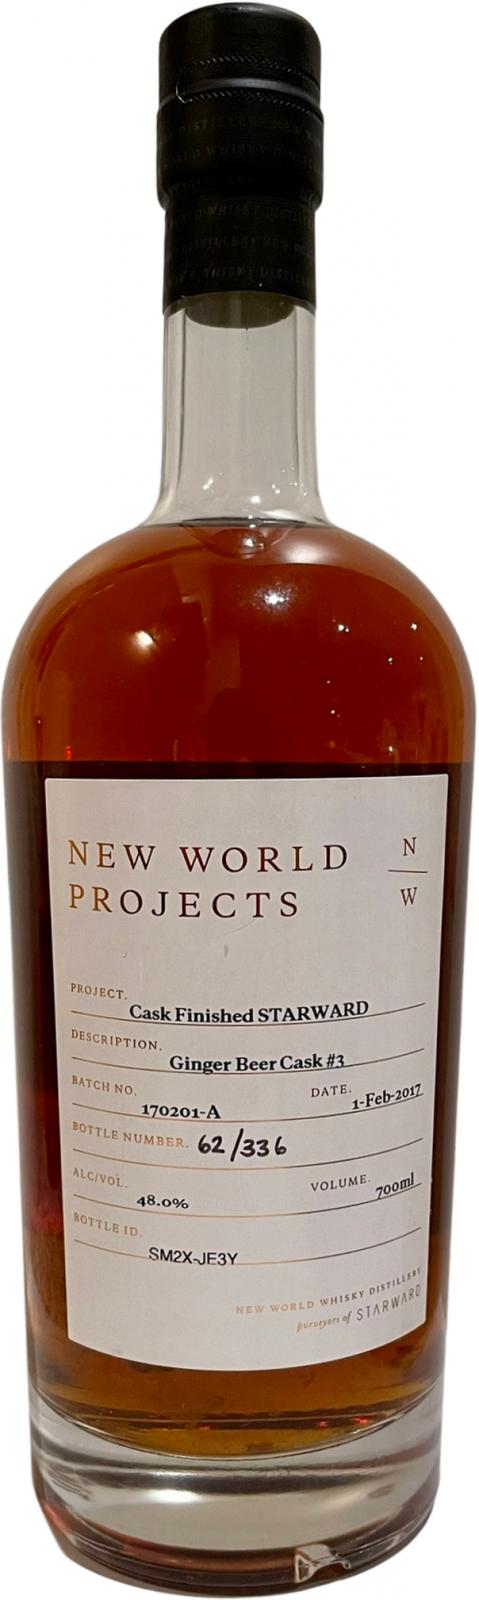 Starward Ginger Beer Cask #3 New World Projects 48% 700ml